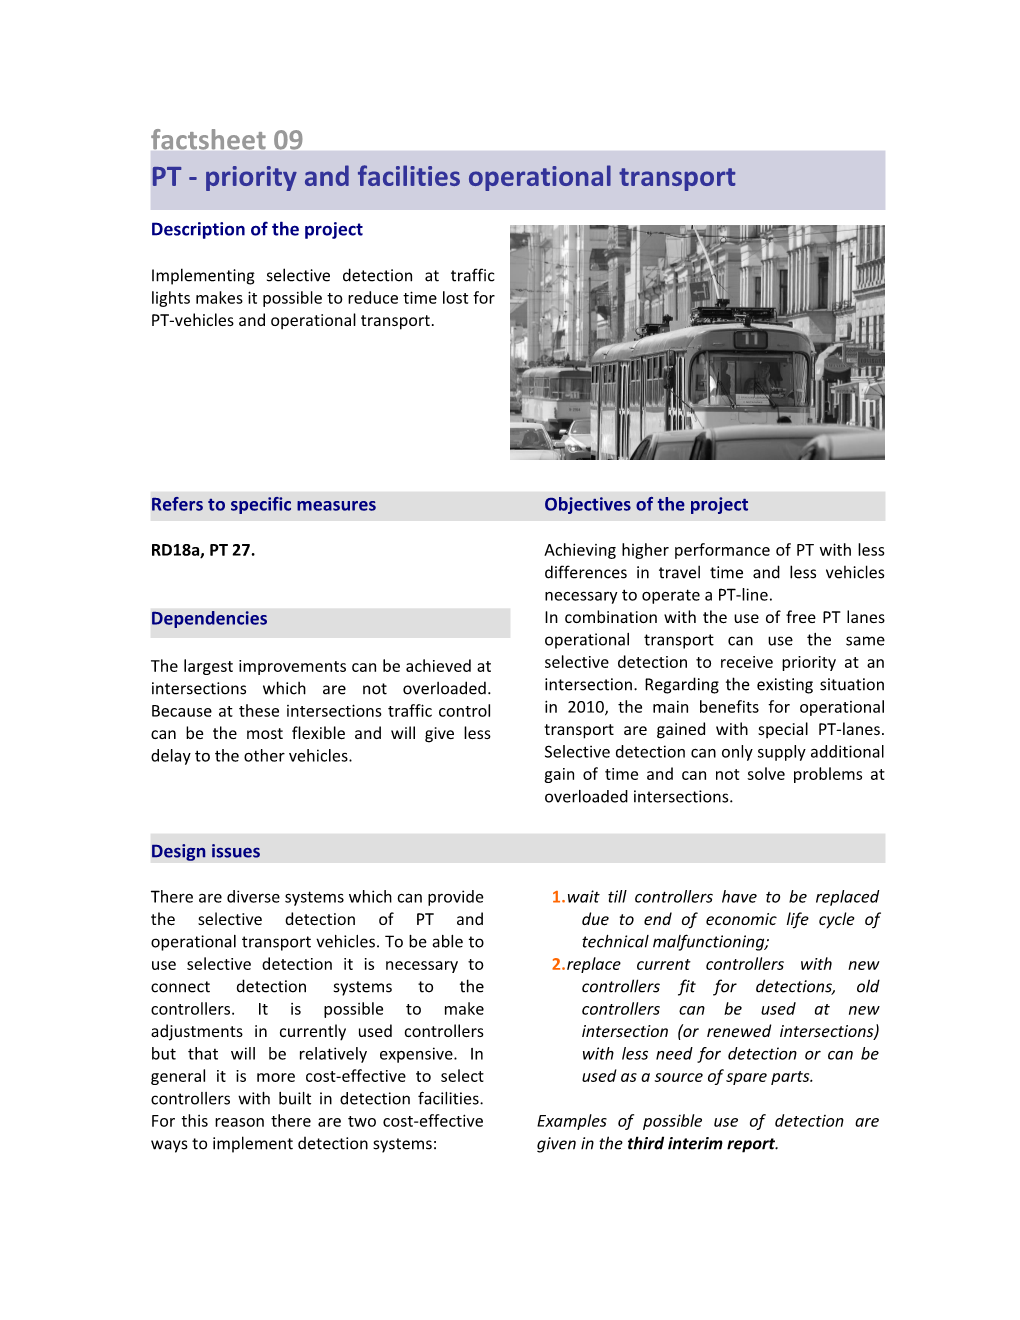 PT-Priority and Facilities Operational Transport